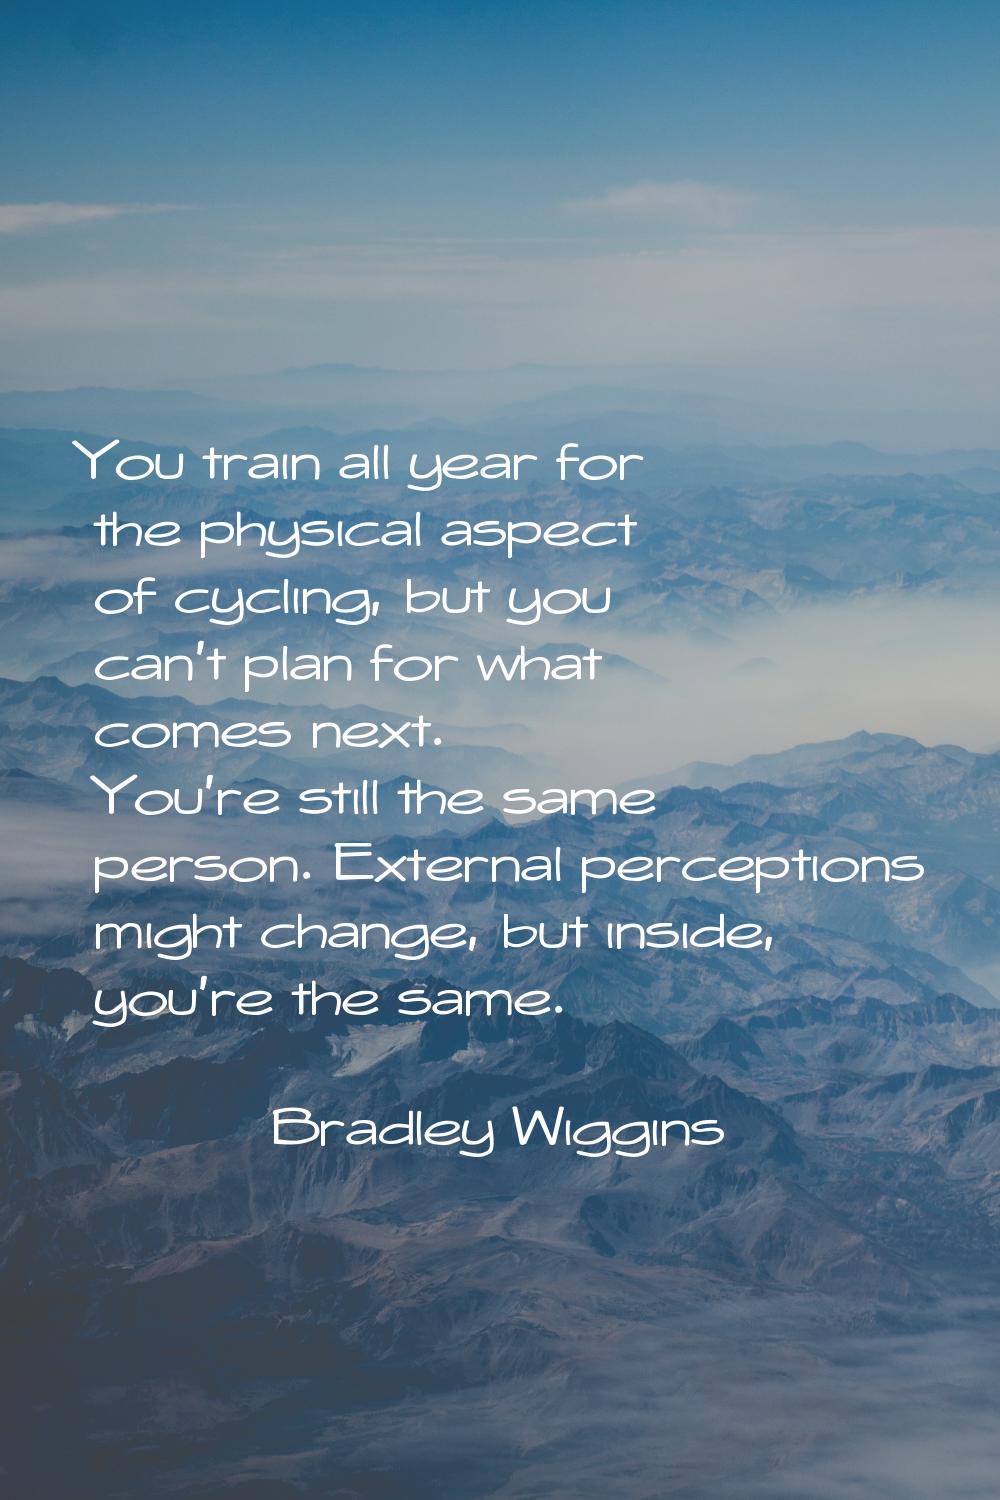 You train all year for the physical aspect of cycling, but you can't plan for what comes next. You'